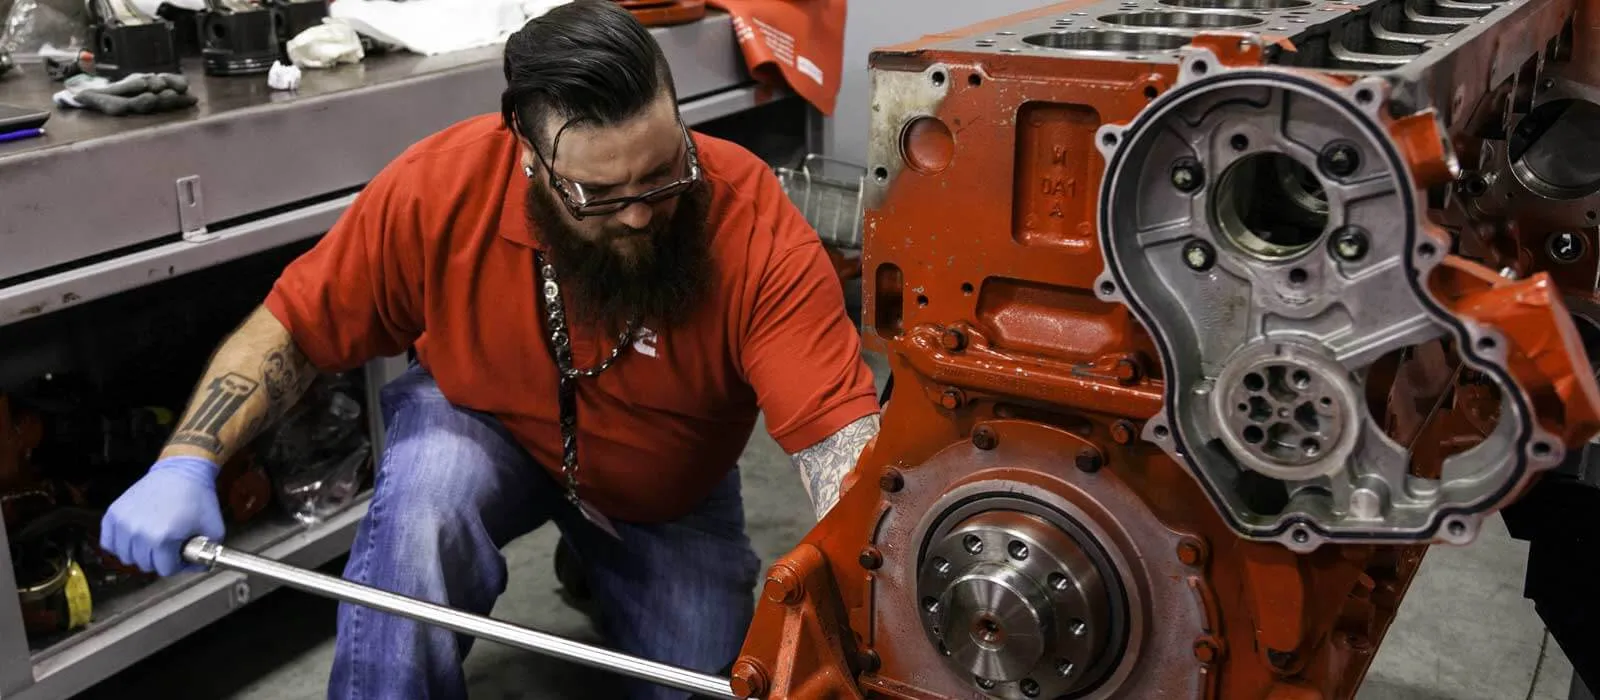 Diesel Mechanic Interview Tips: How to Prepare Before Meeting With an Employer